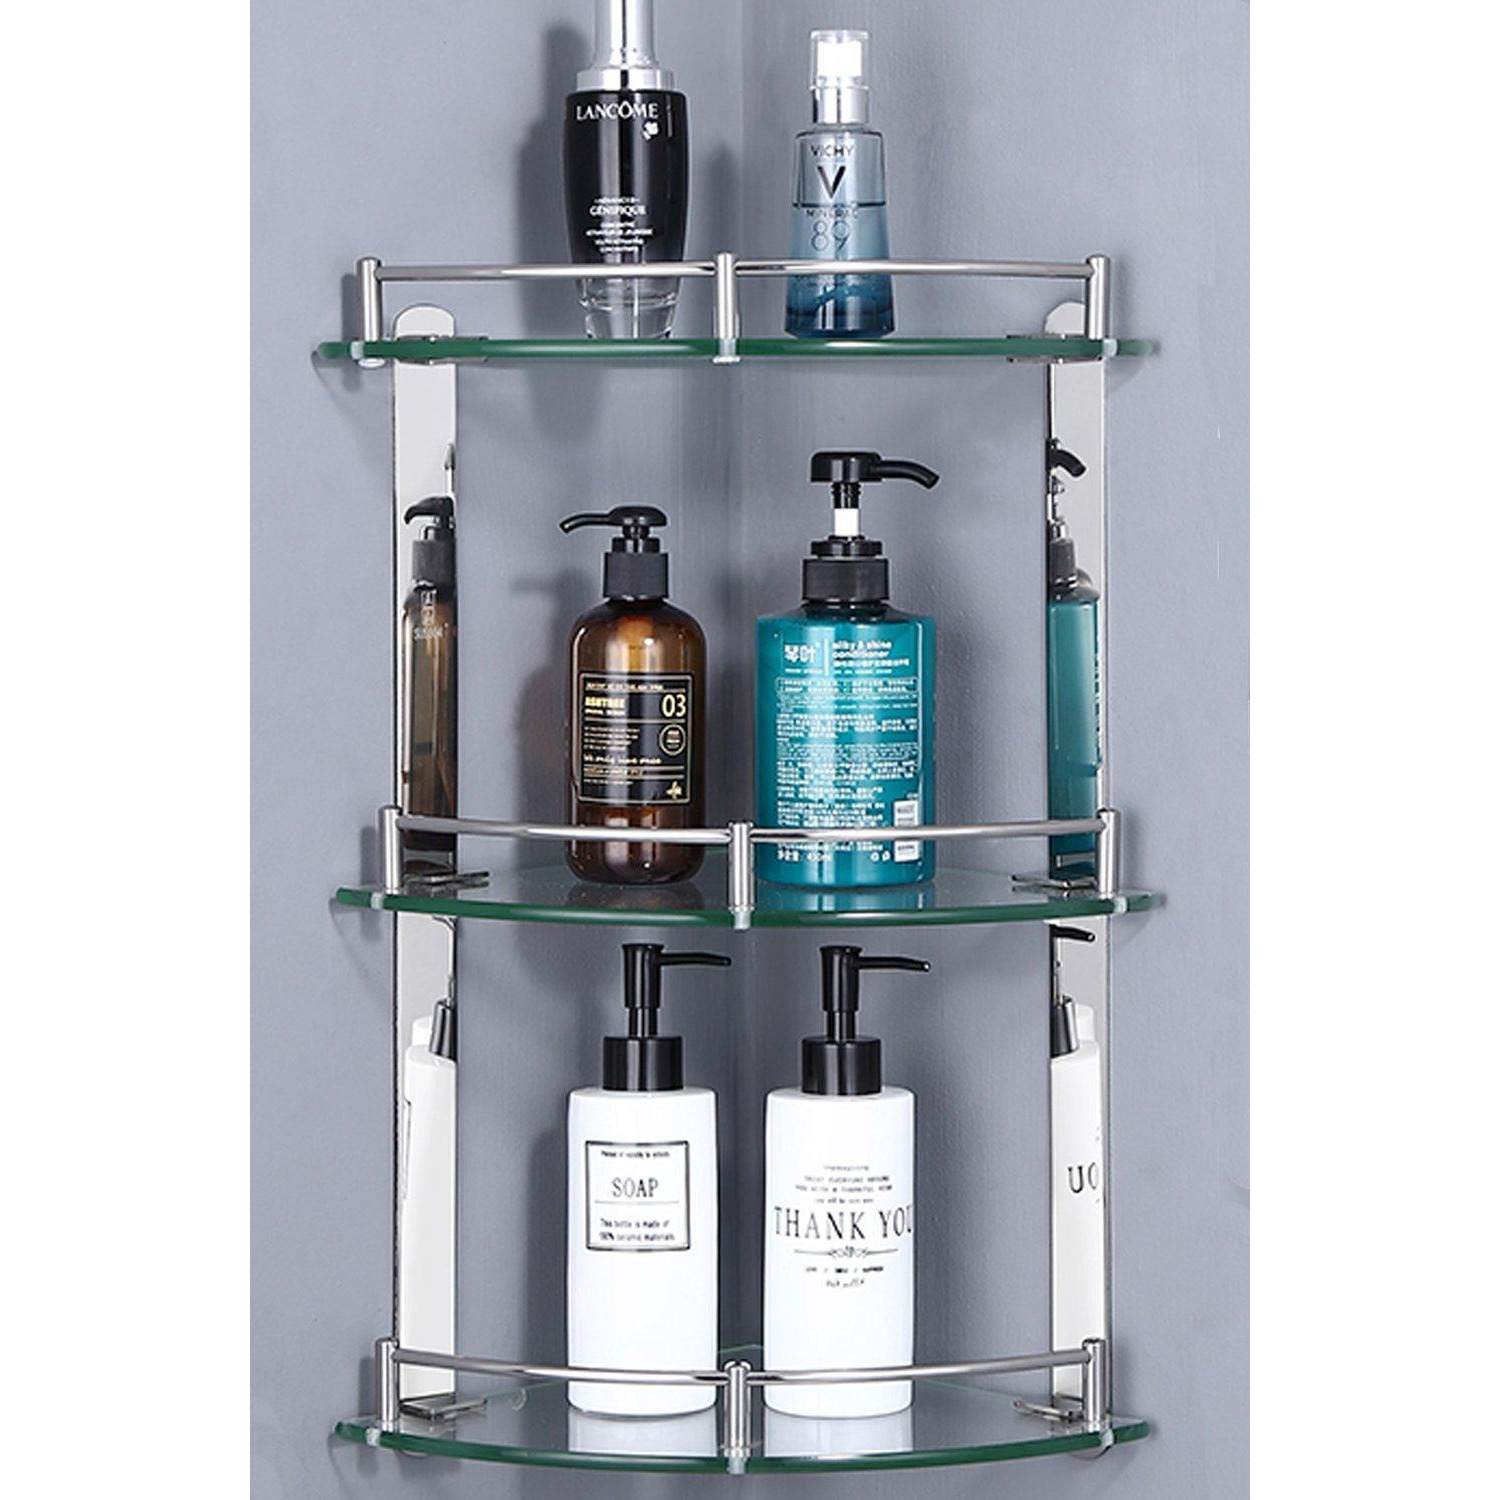 3 Tiers Wall Mounted Bathroom Tempered Glass Corner Shelf with Steel Rail 20cm - image 1